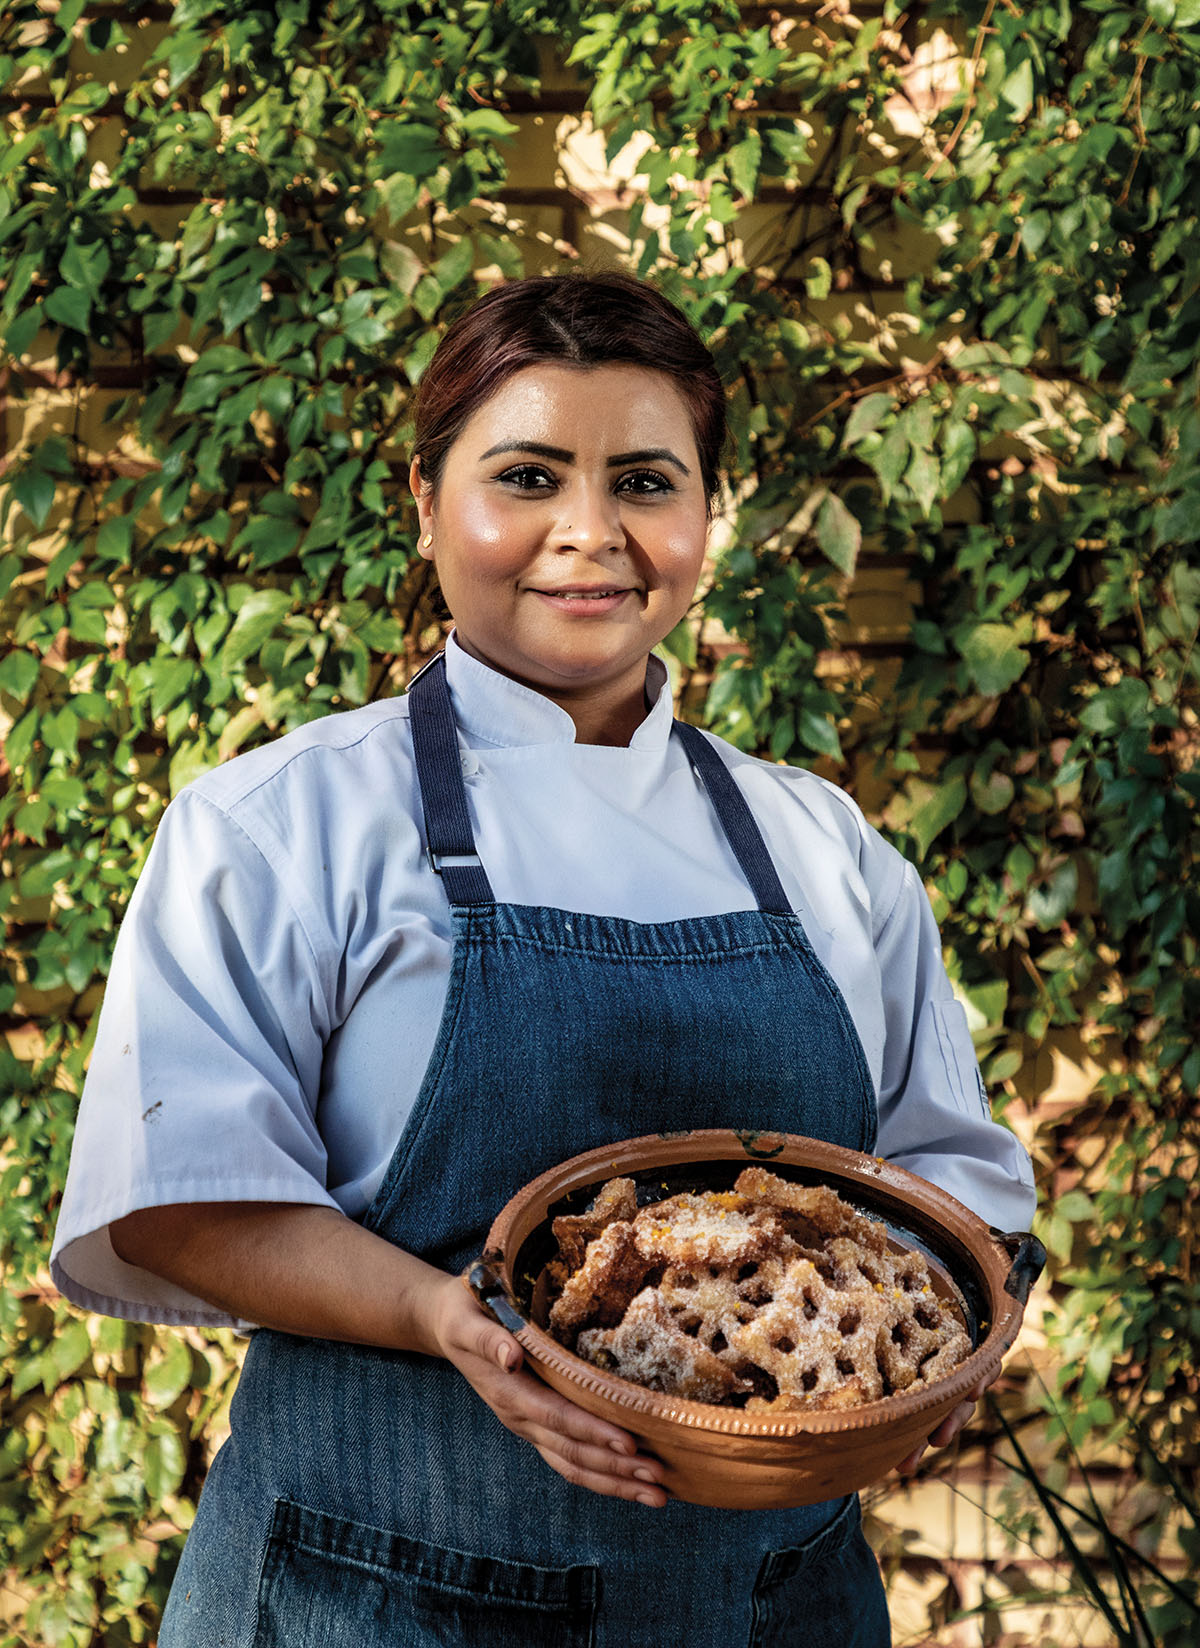 A woman in a blue collared shirt wearing a dark blue apron stands with a basket full of cinnamon sugar treats outdoors